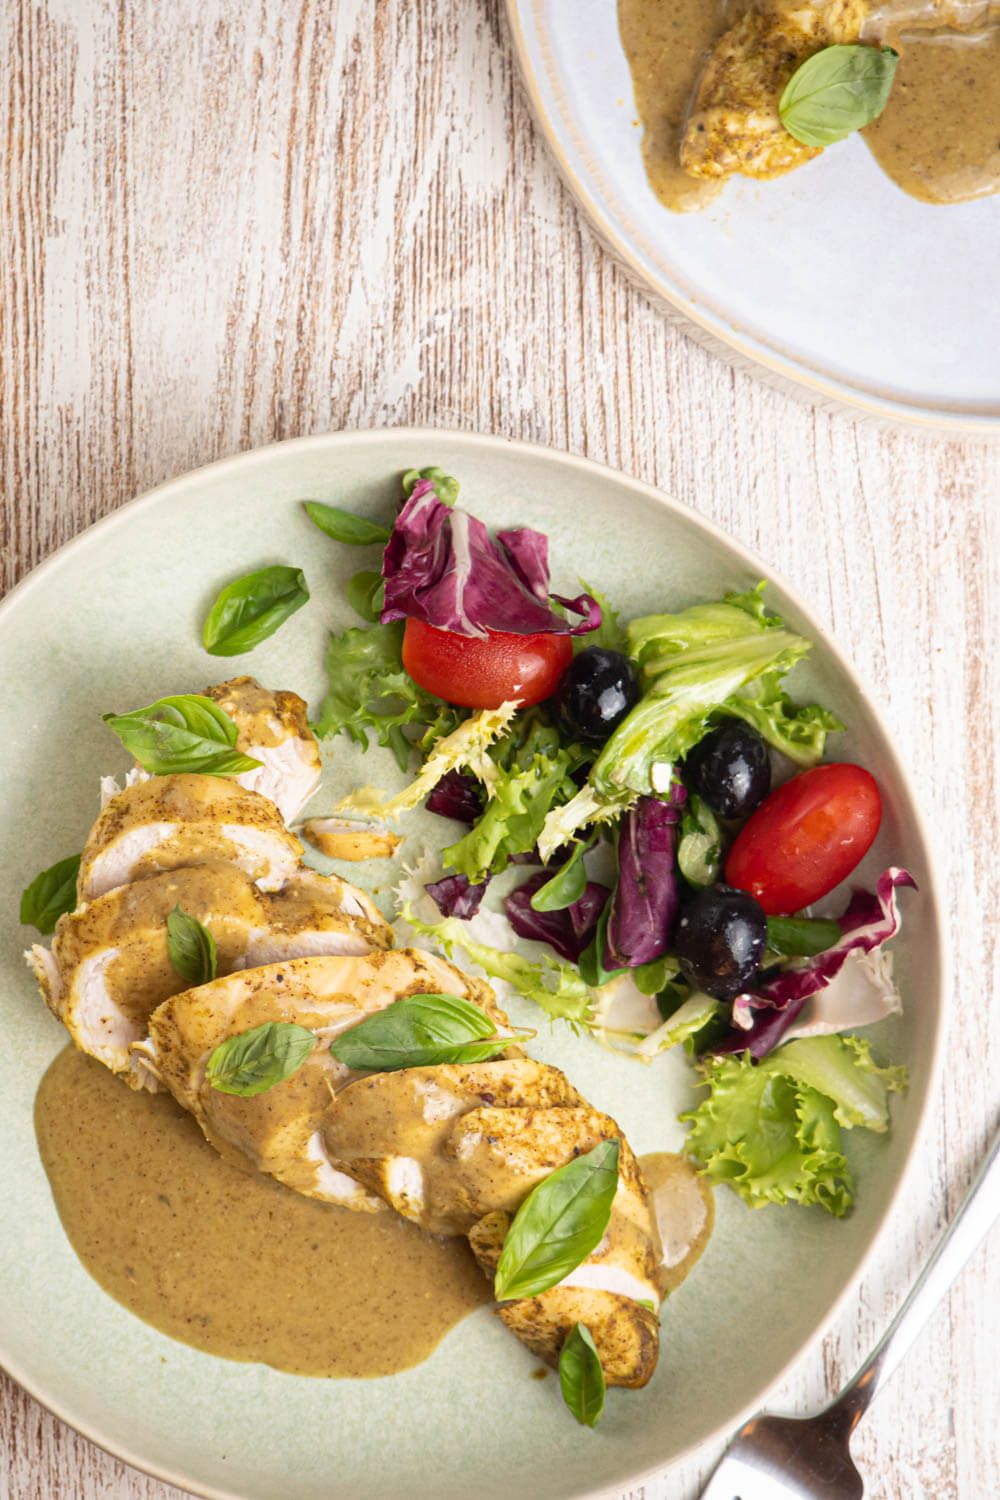 Coconut basil chicken breast cut into sliced with a creamy sauce and salad.